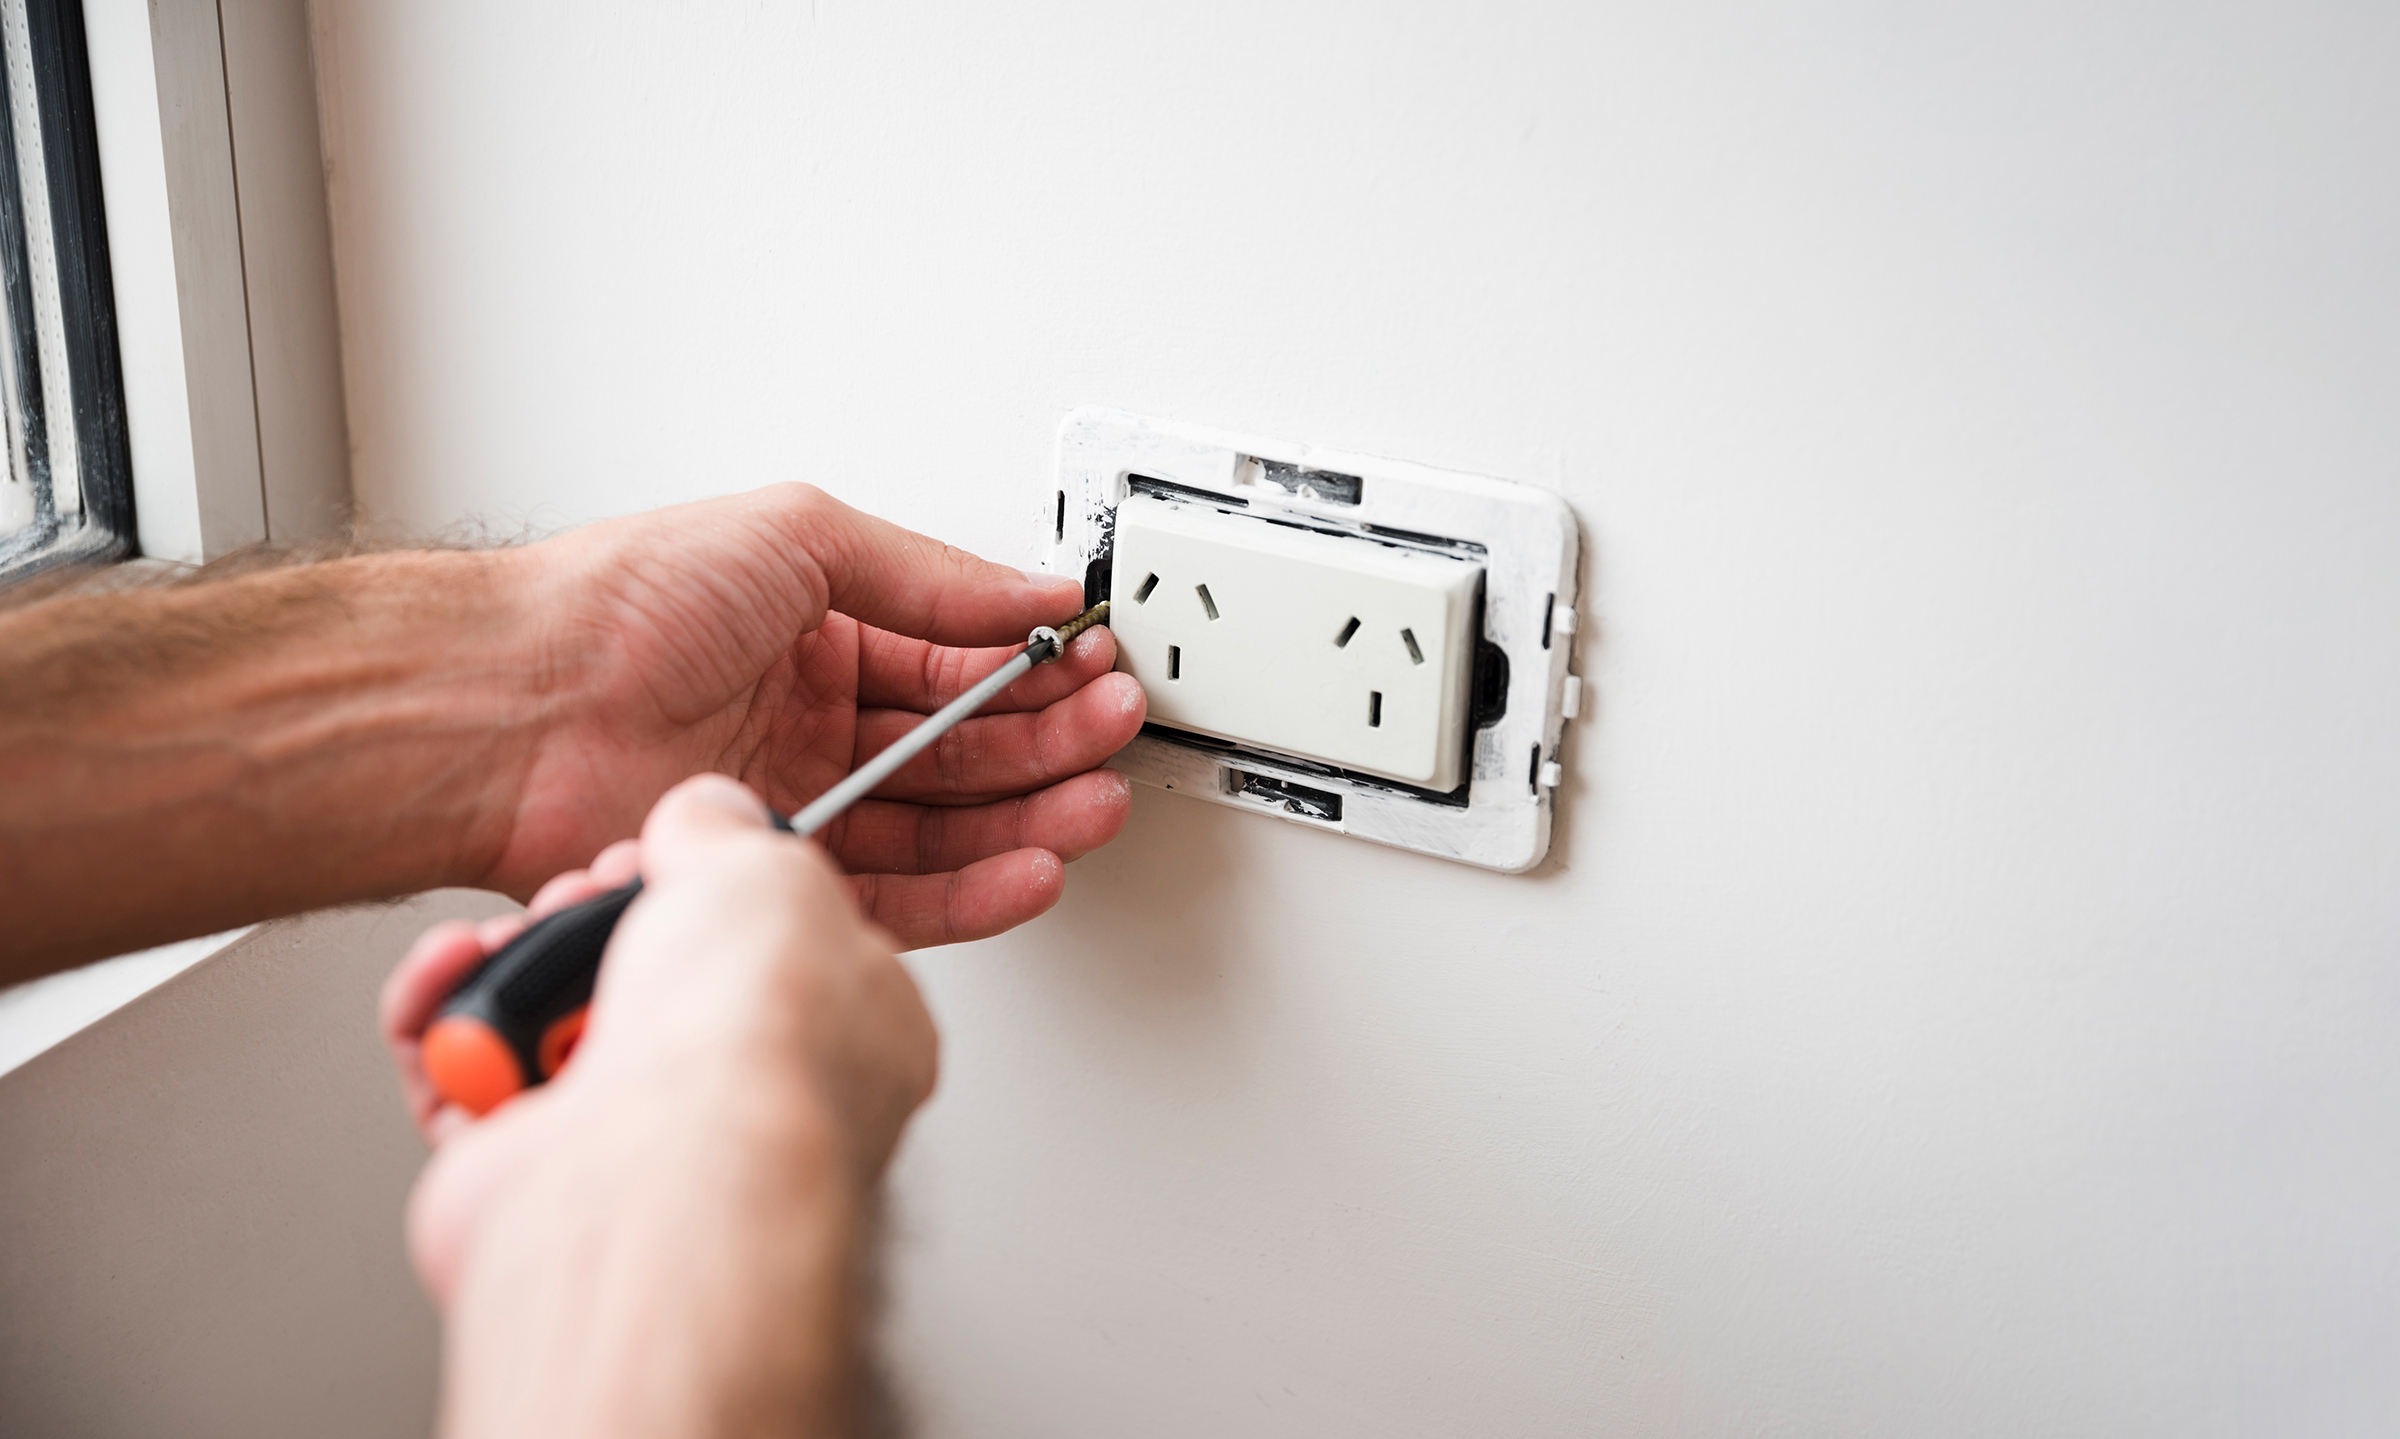 6 Qualities to Look for When Hiring Electricians